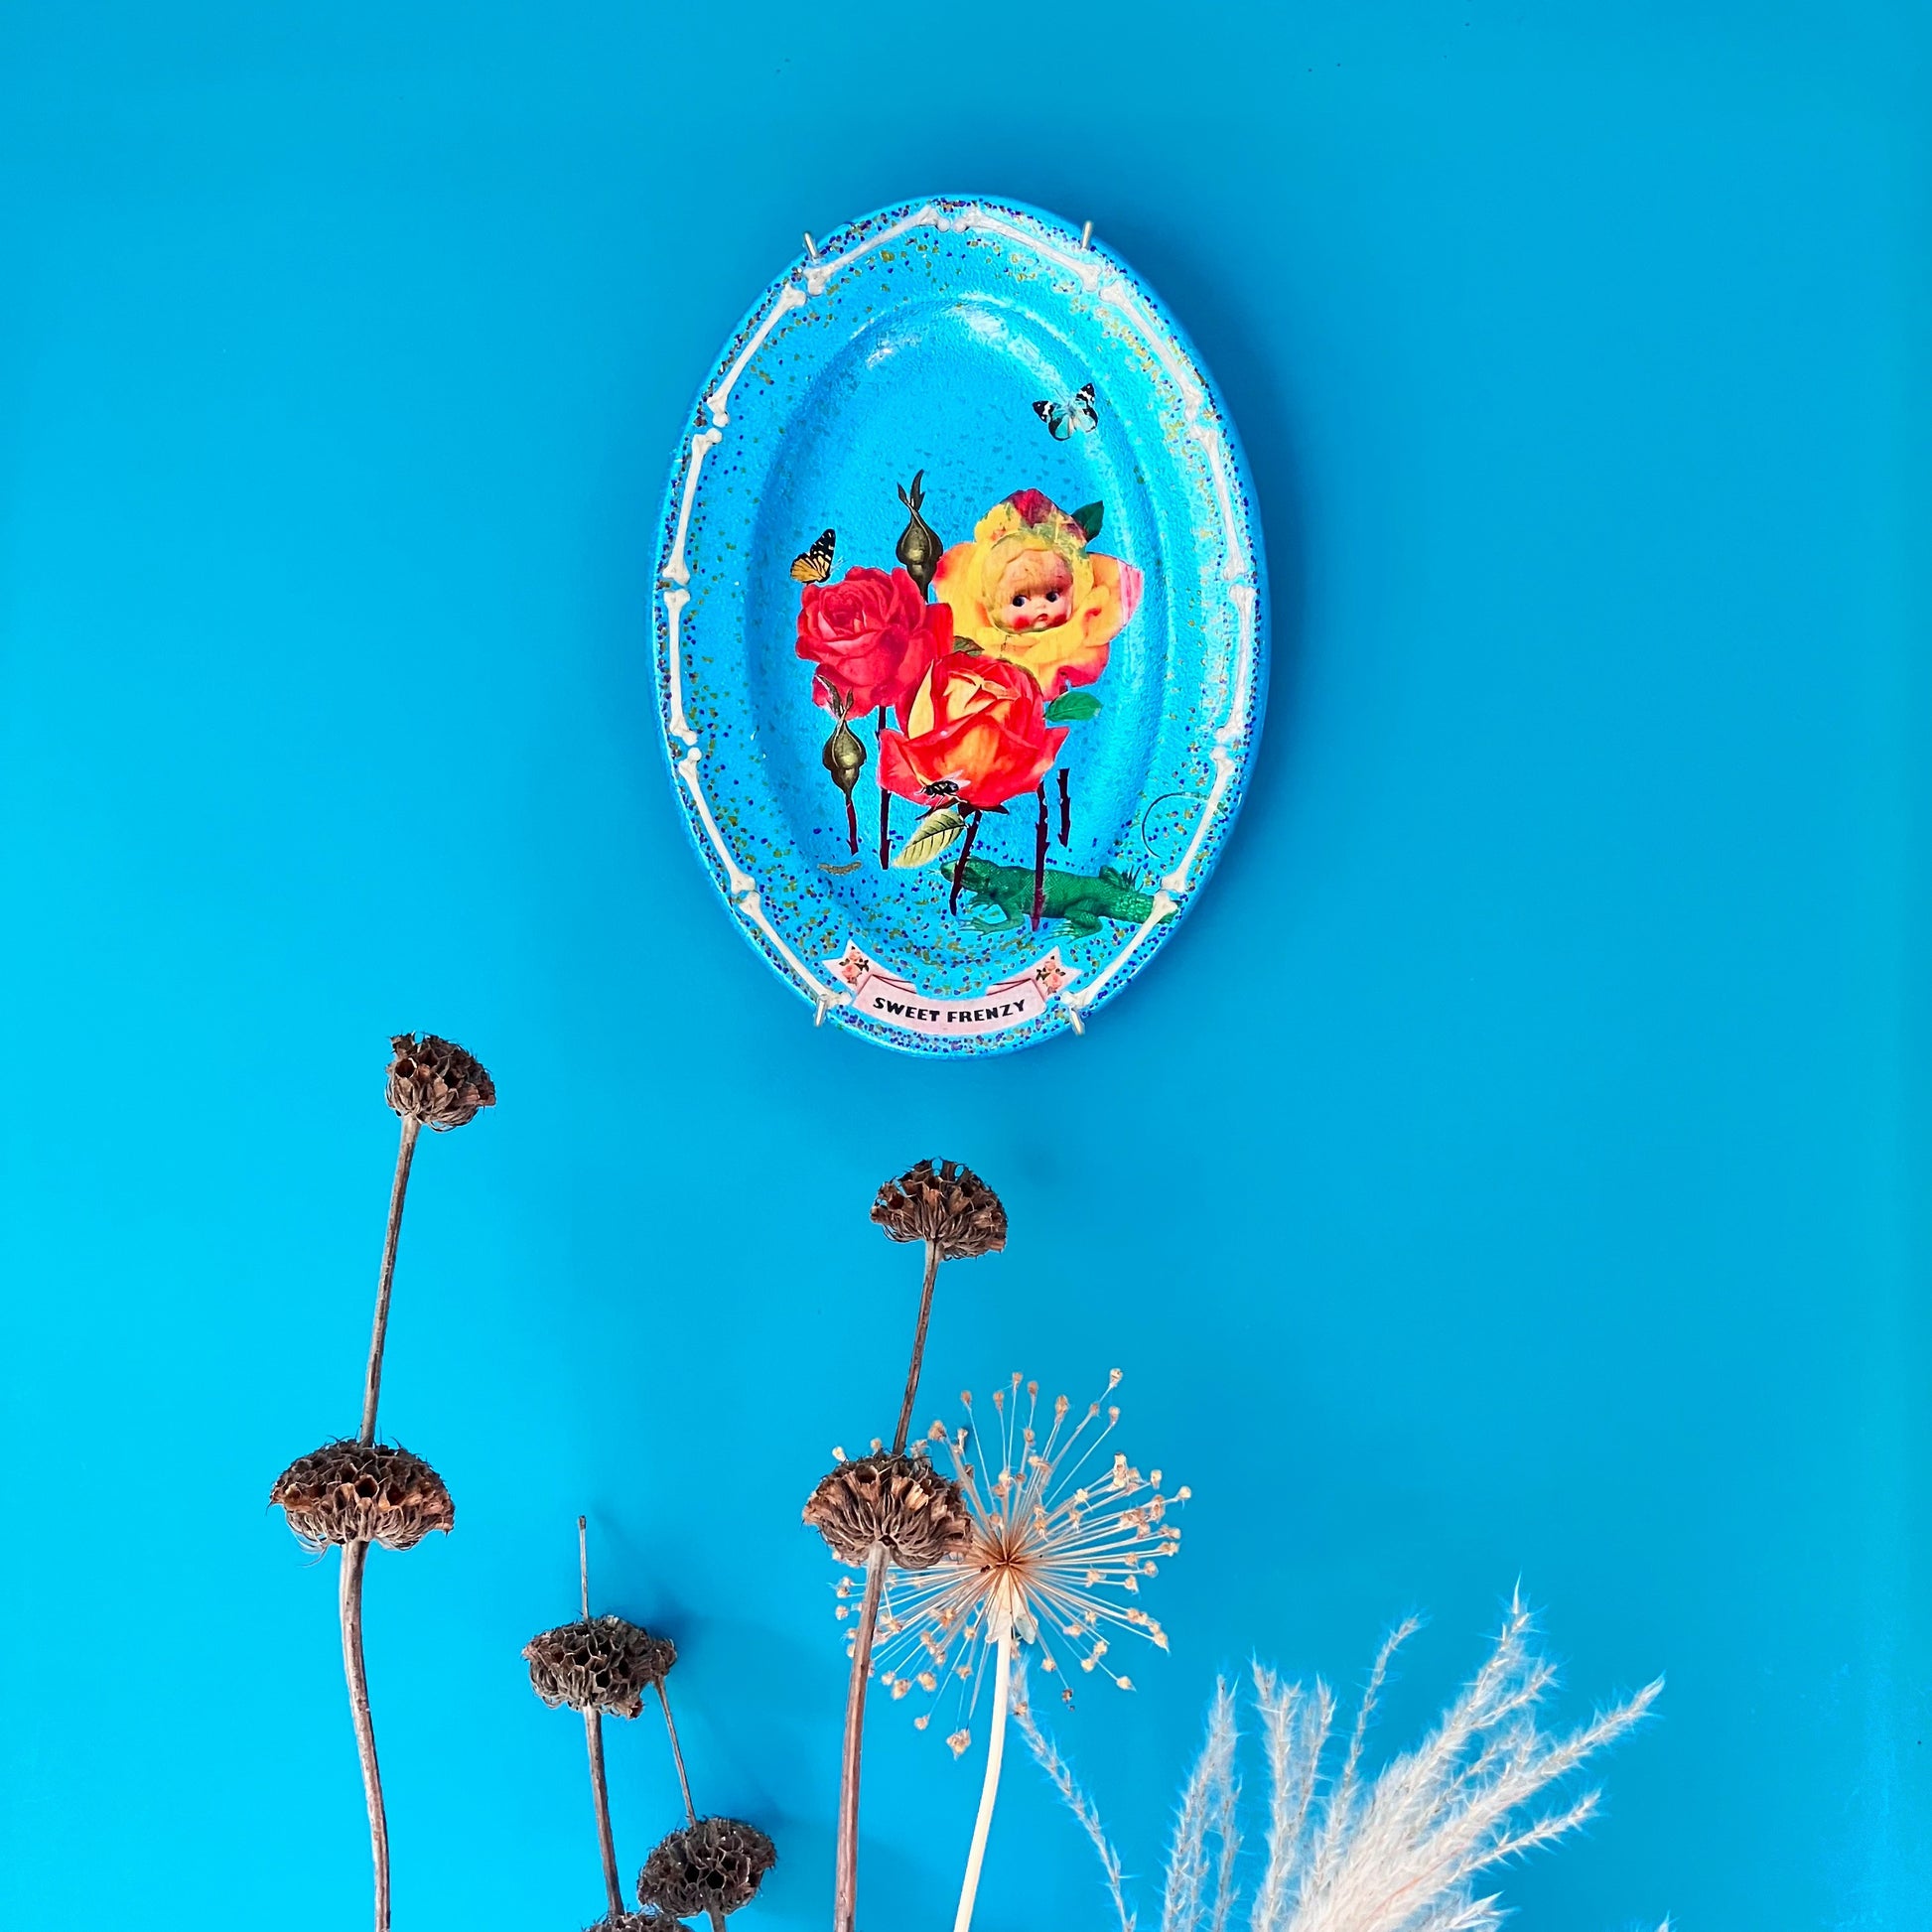 "Sweet Frenzy" Upcycled Wall Plate by House of Frisson, featuring some vintage flowers, moths, a fly, and a lizard, against a turquoise background and a frame of bones. Plate hanging on a turquoise wall.